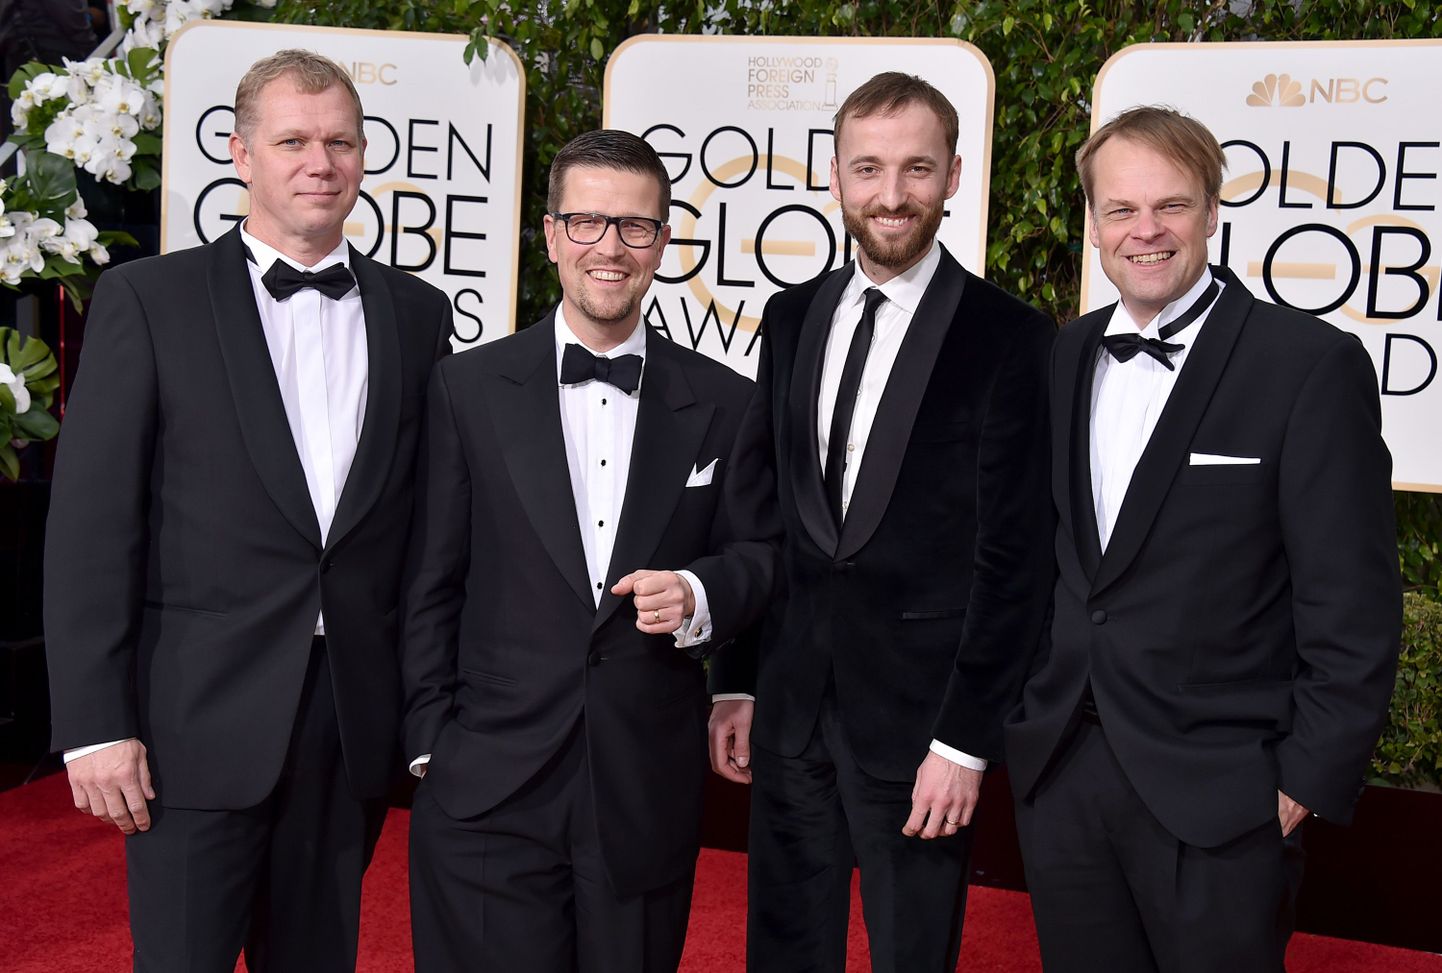 Kai Nordberg, from left, Klaus Haro, Mart Avandi, and Kaarle Aho arrive at the 73rd annual Golden Globe Awards on Sunday, Jan. 10, 2016, at the Beverly Hilton Hotel in Beverly Hills, Calif. (Photo by Jordan Strauss/Invision/AP)